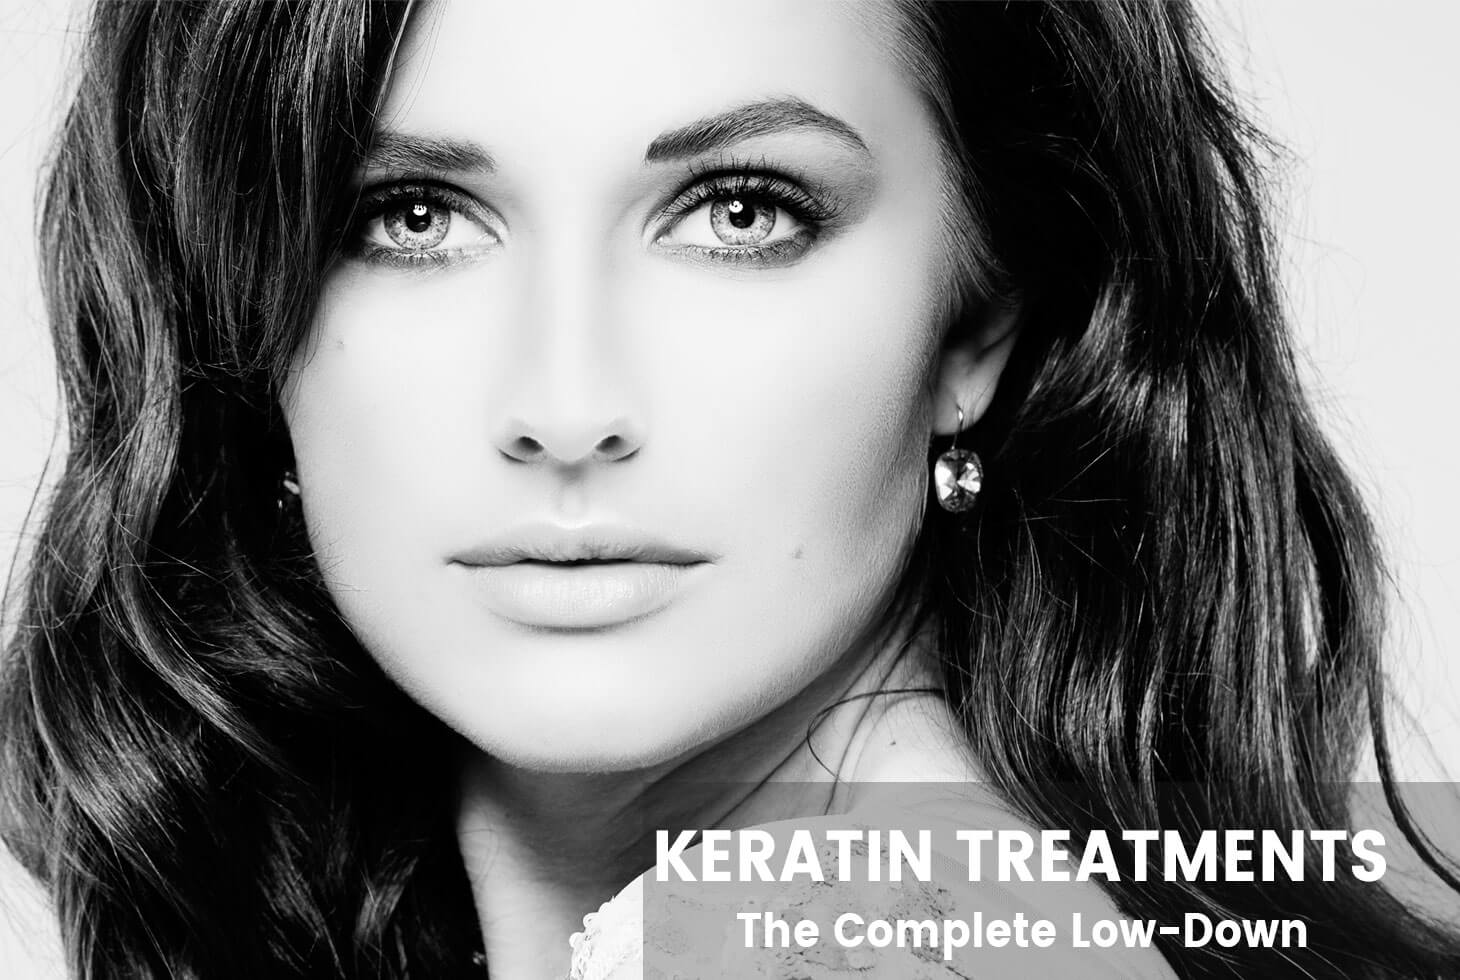 What Does A Keratin Treatment Do? 33 Benefits That Will Surprise You!